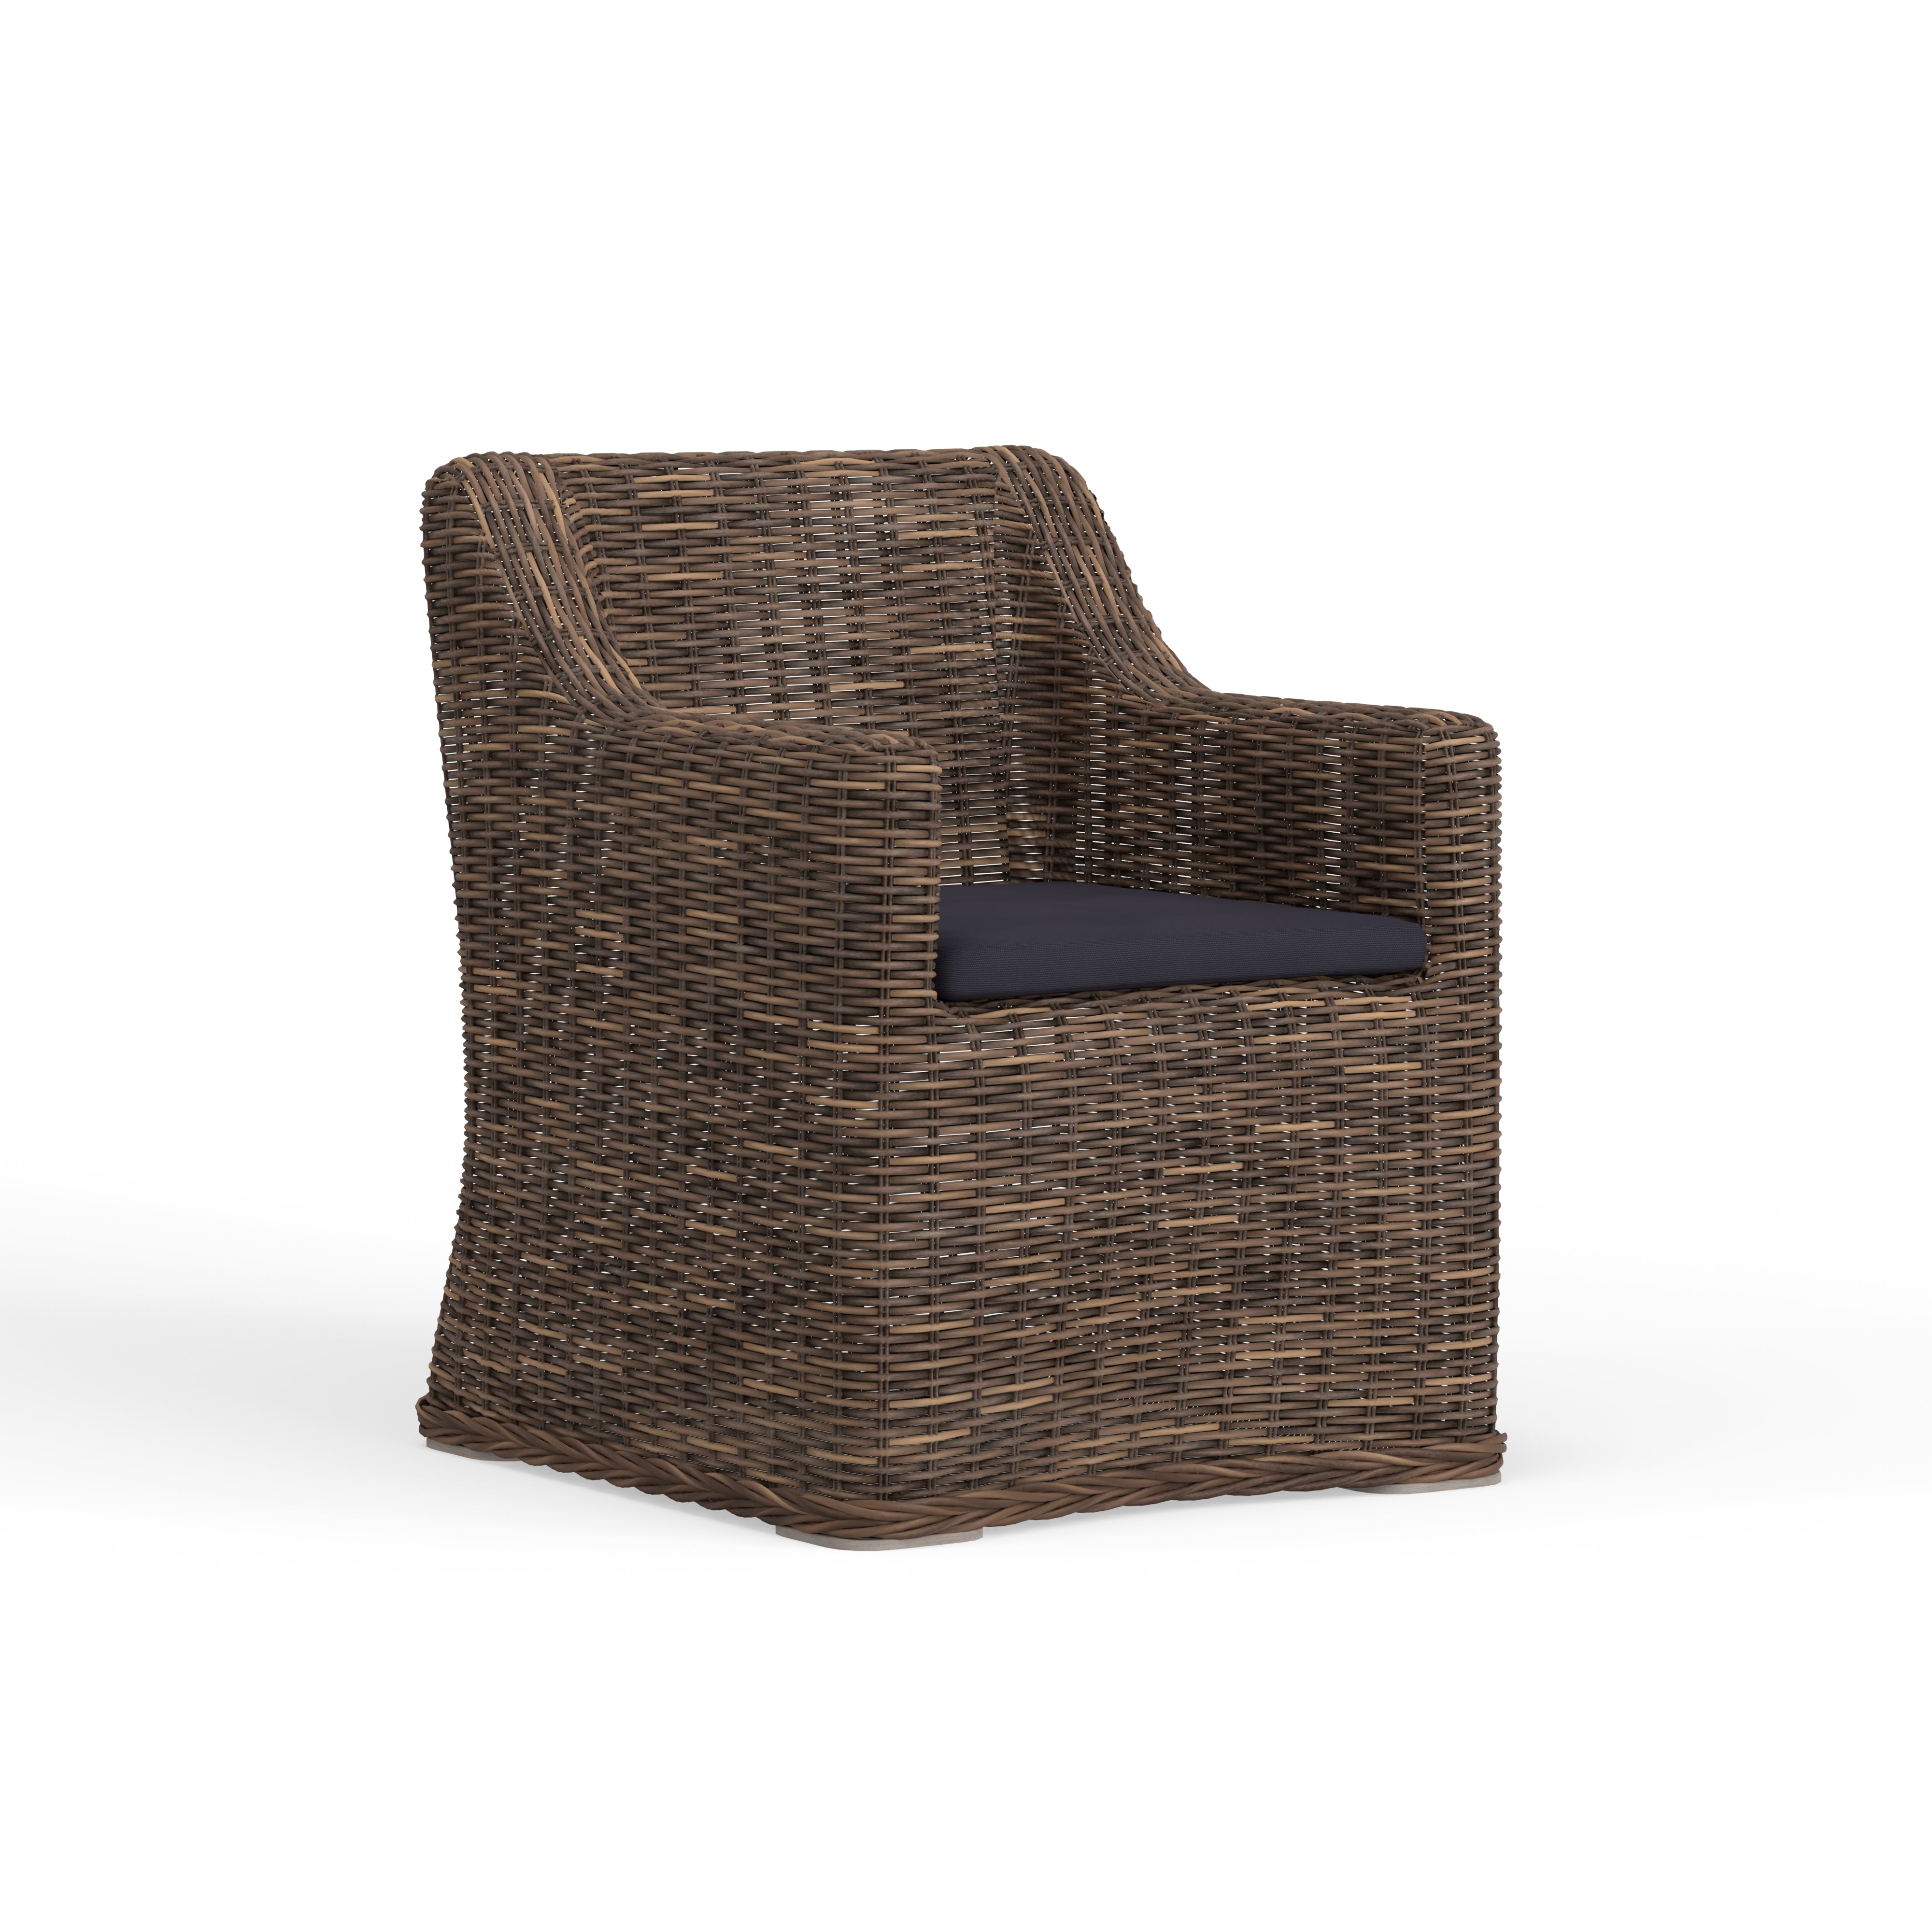 Wicker Furniture That Lasts Outdoors In Sun